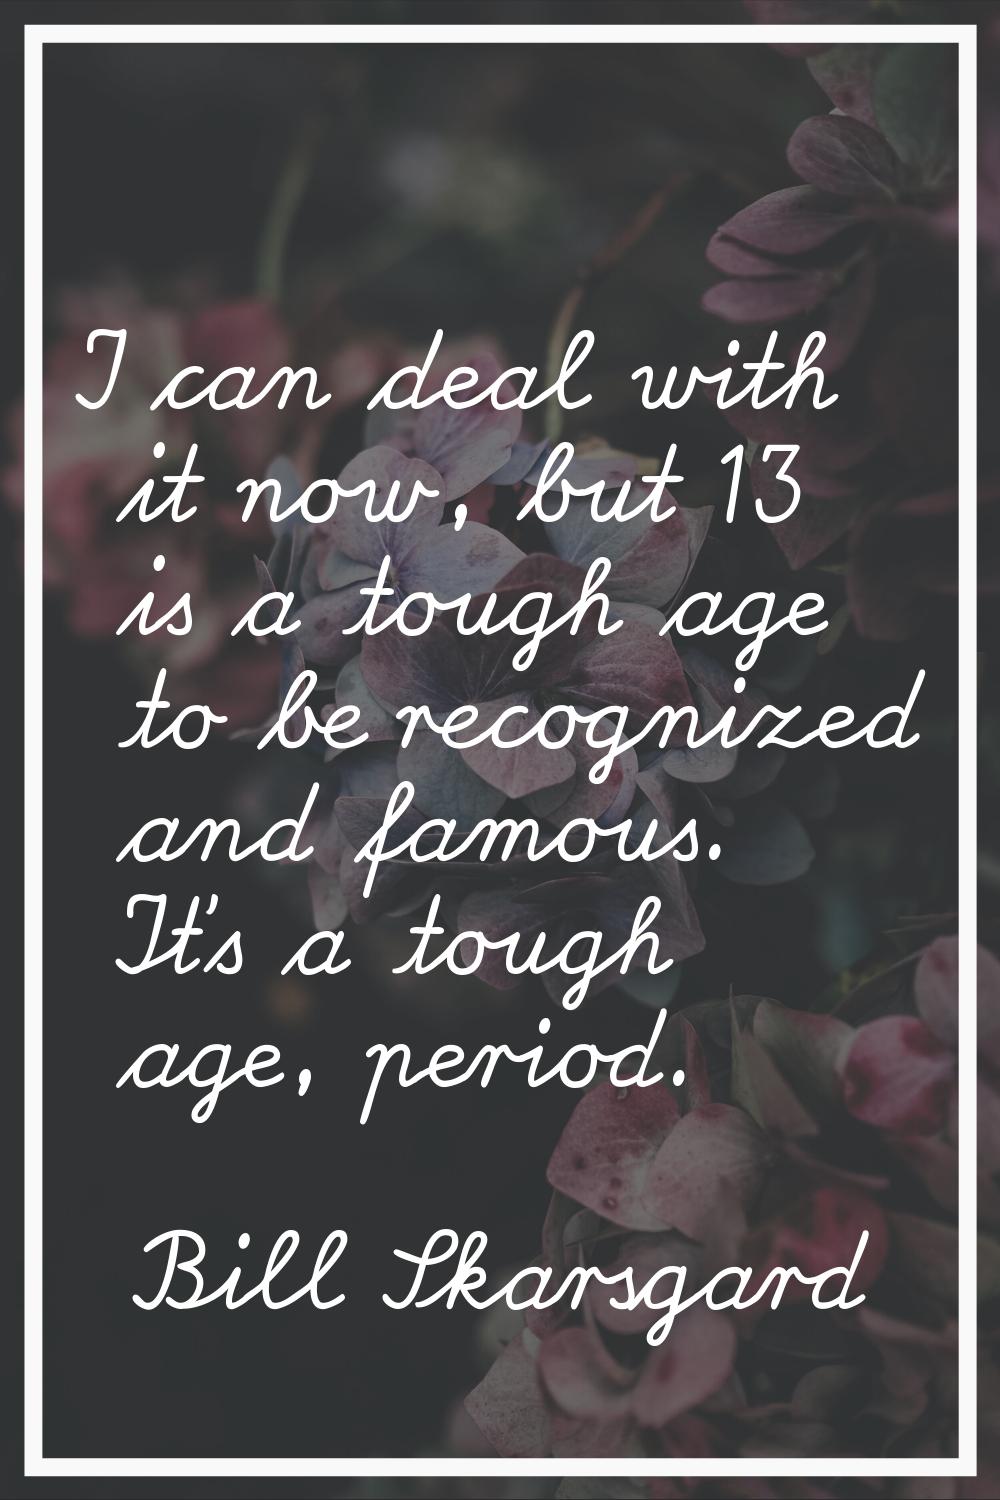 I can deal with it now, but 13 is a tough age to be recognized and famous. It's a tough age, period